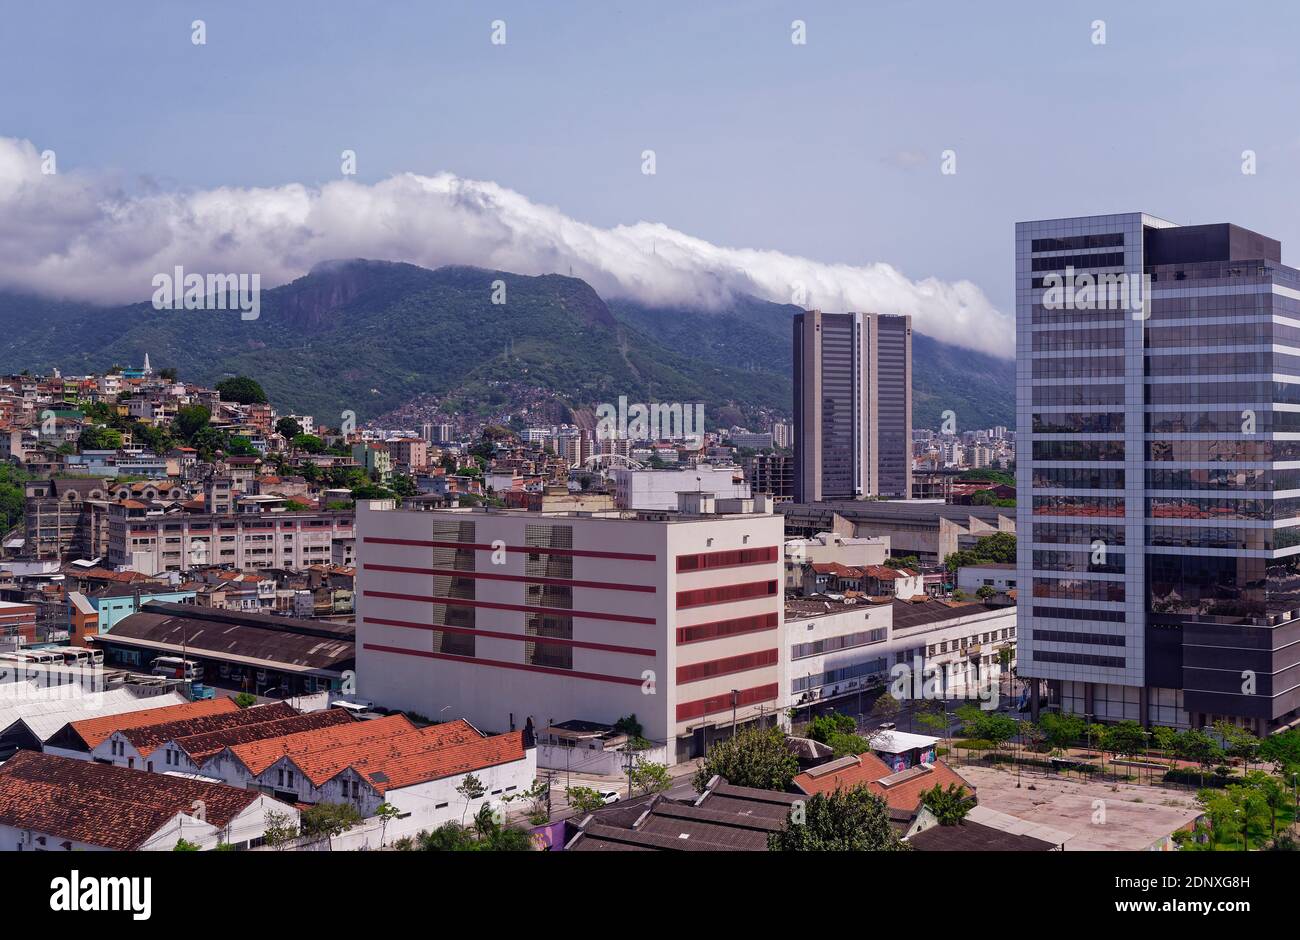 Some of the traditional and modern buildings within the Old Port Area of Rio de Janeiro with the dramatic mountains in the background, Stock Photo